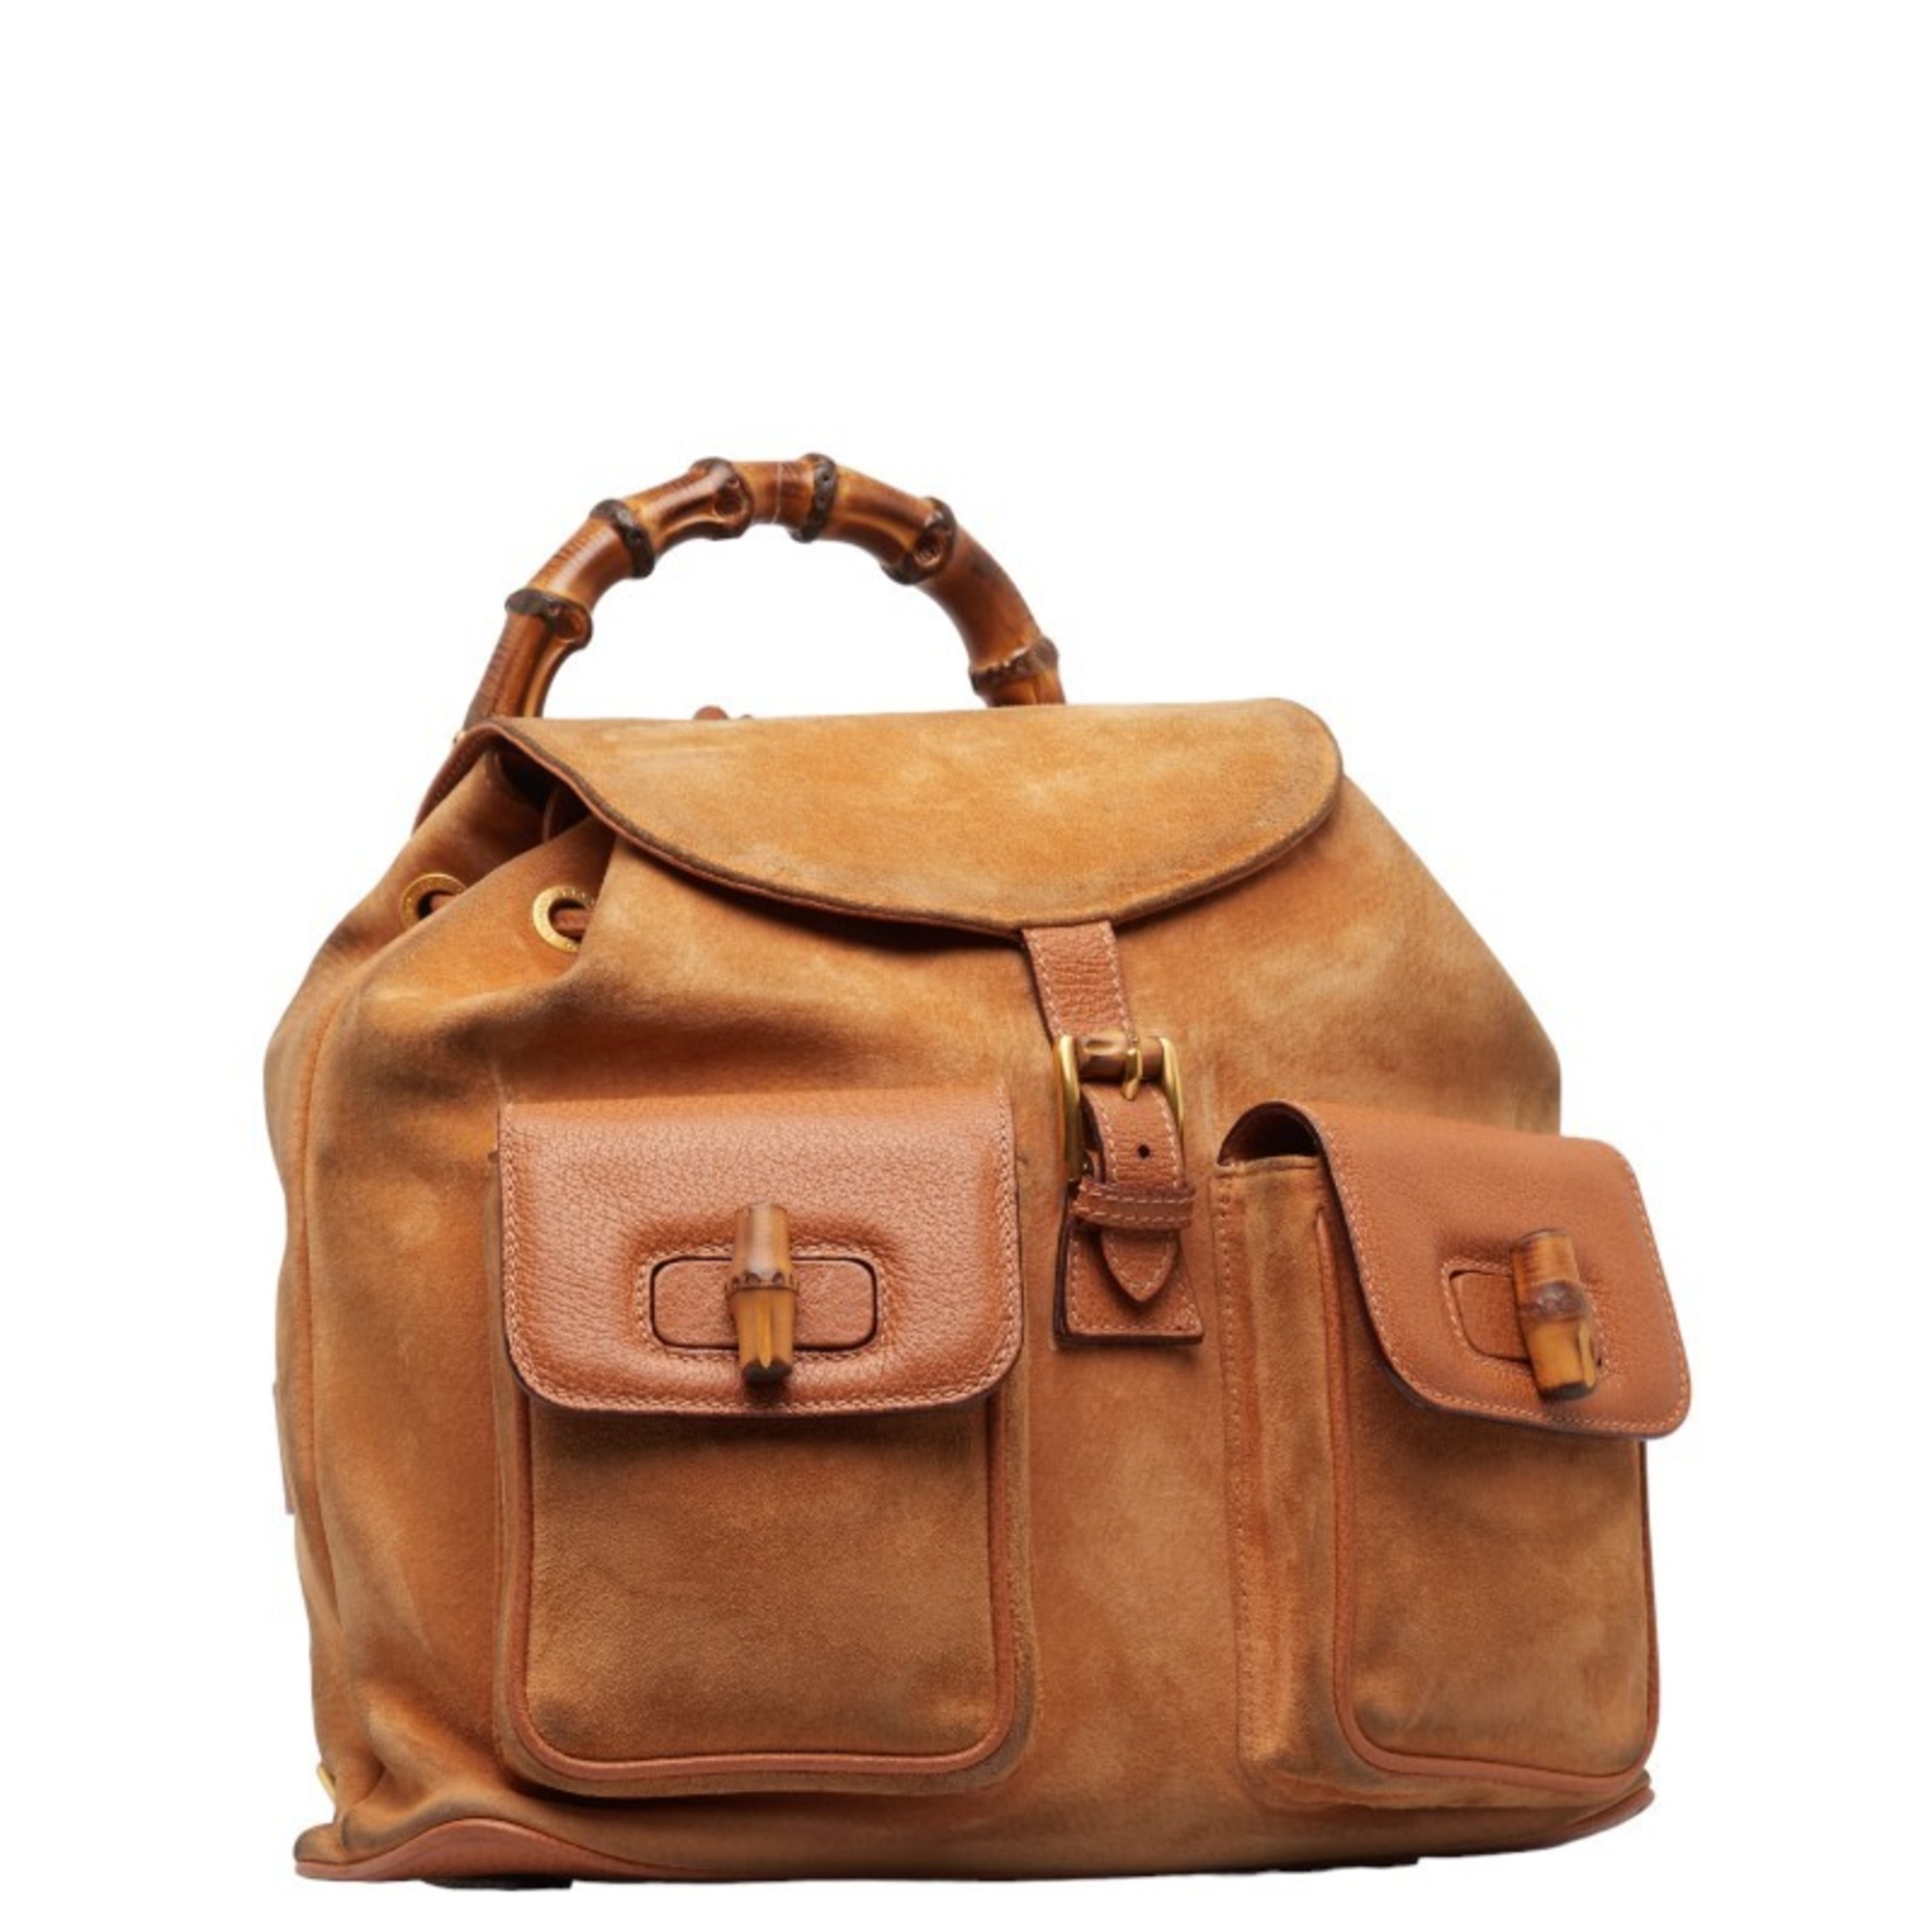 Gucci Bamboo Backpack 003.58.0016 Brown Beige Suede Leather Women's GUCCI